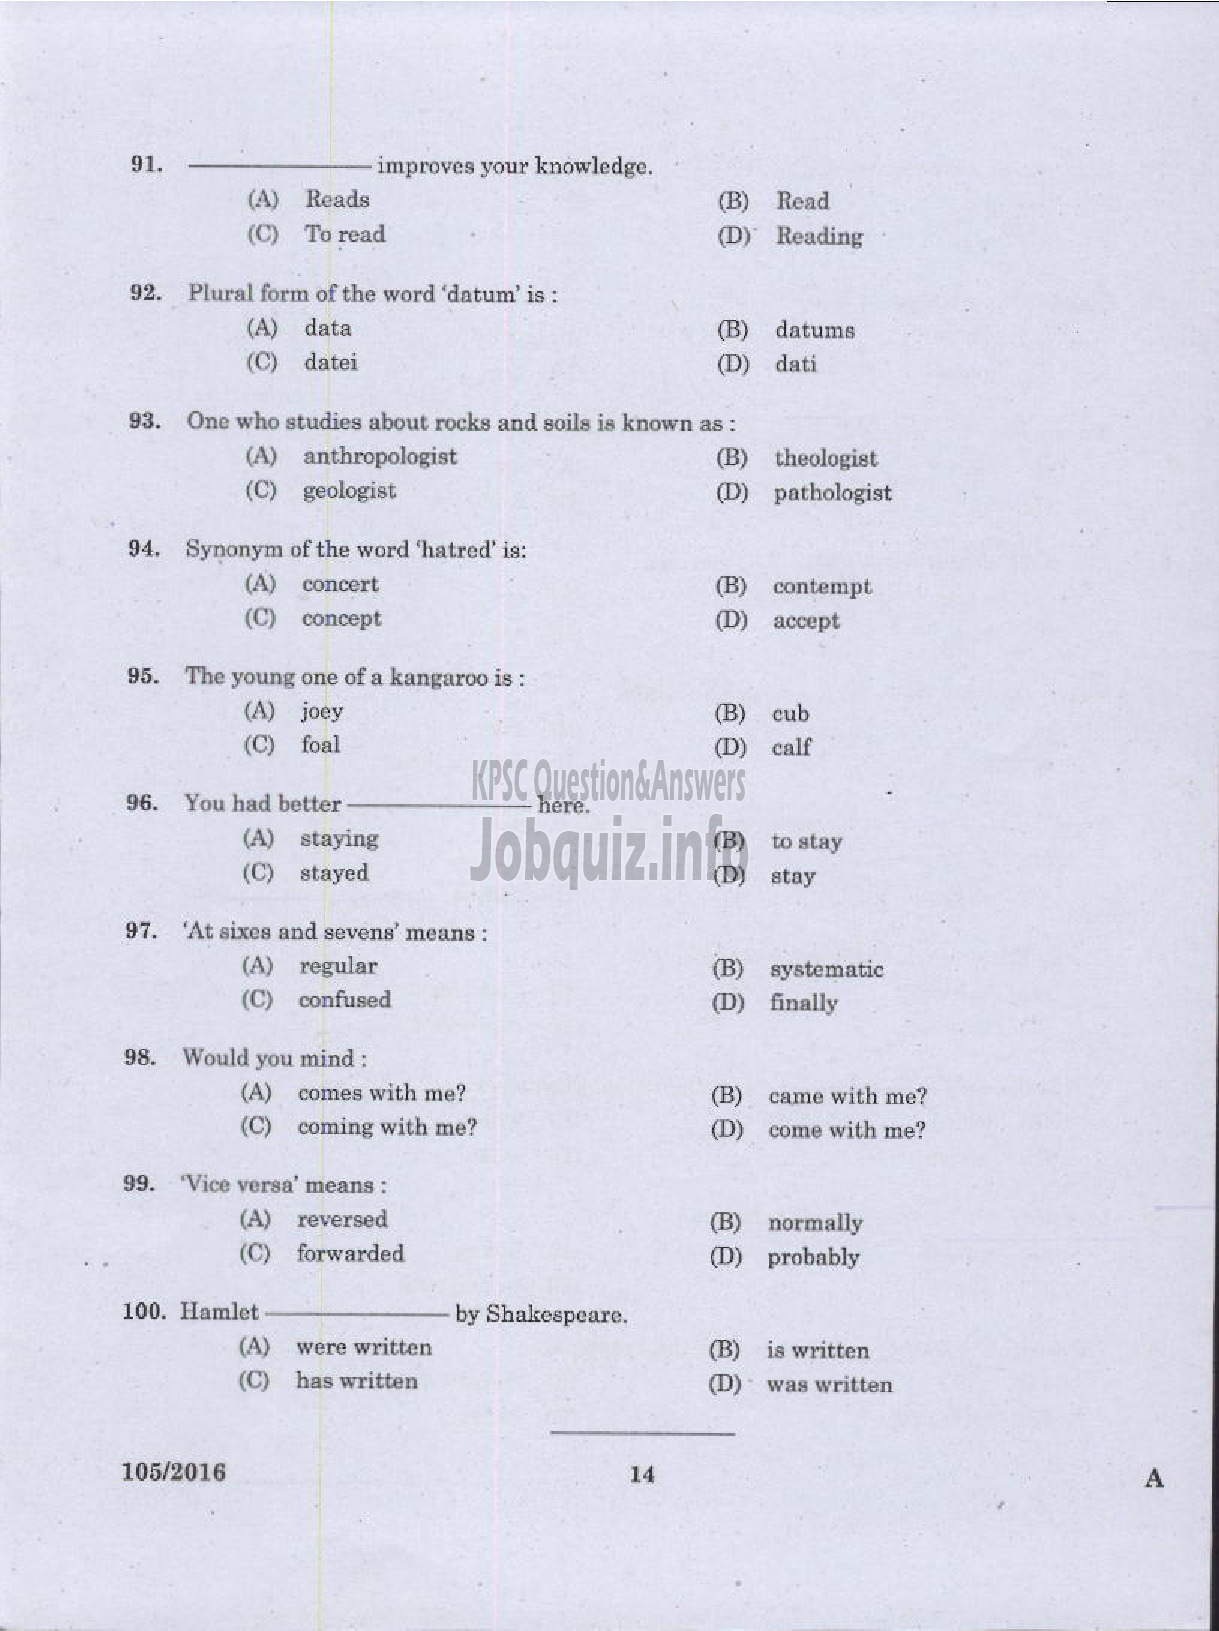 Kerala PSC Question Paper - LOWER DIVISION CLERK KANNADA AND MALAYALAM KNOWING VARIOUS-12